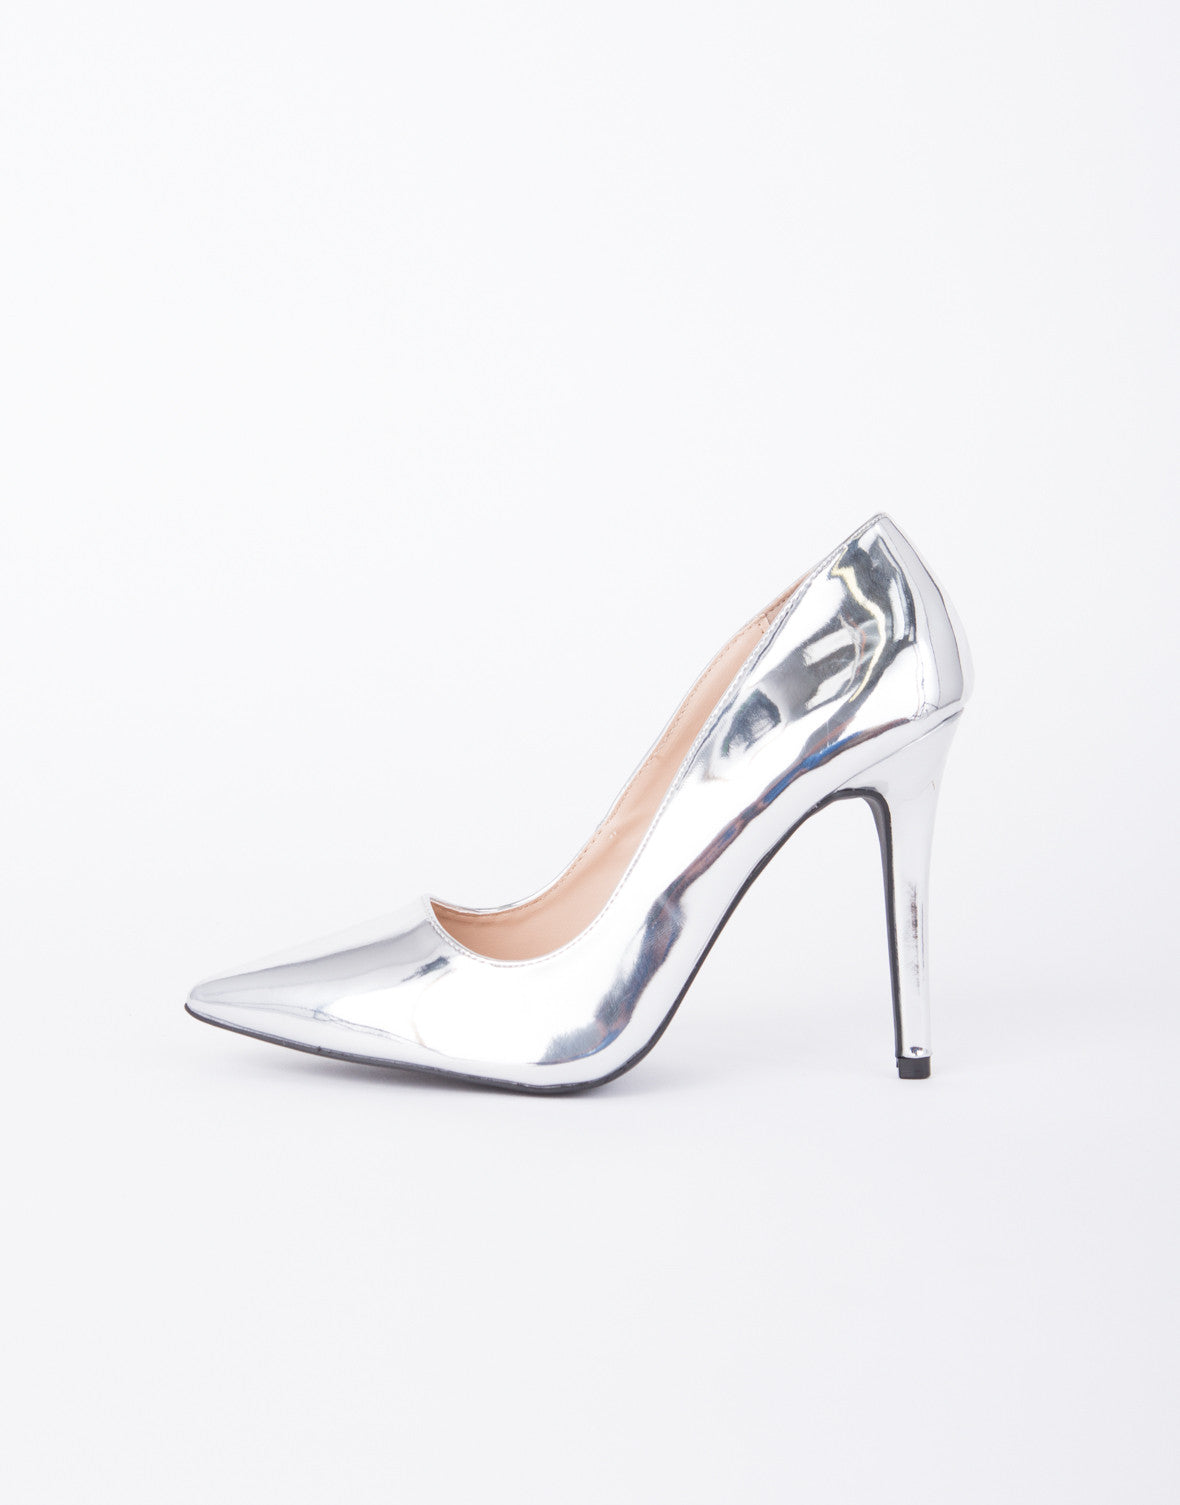 Shiny Metallic Pumps - Shiny Silver Heels - Silver Pointy Pumps – 2020AVE